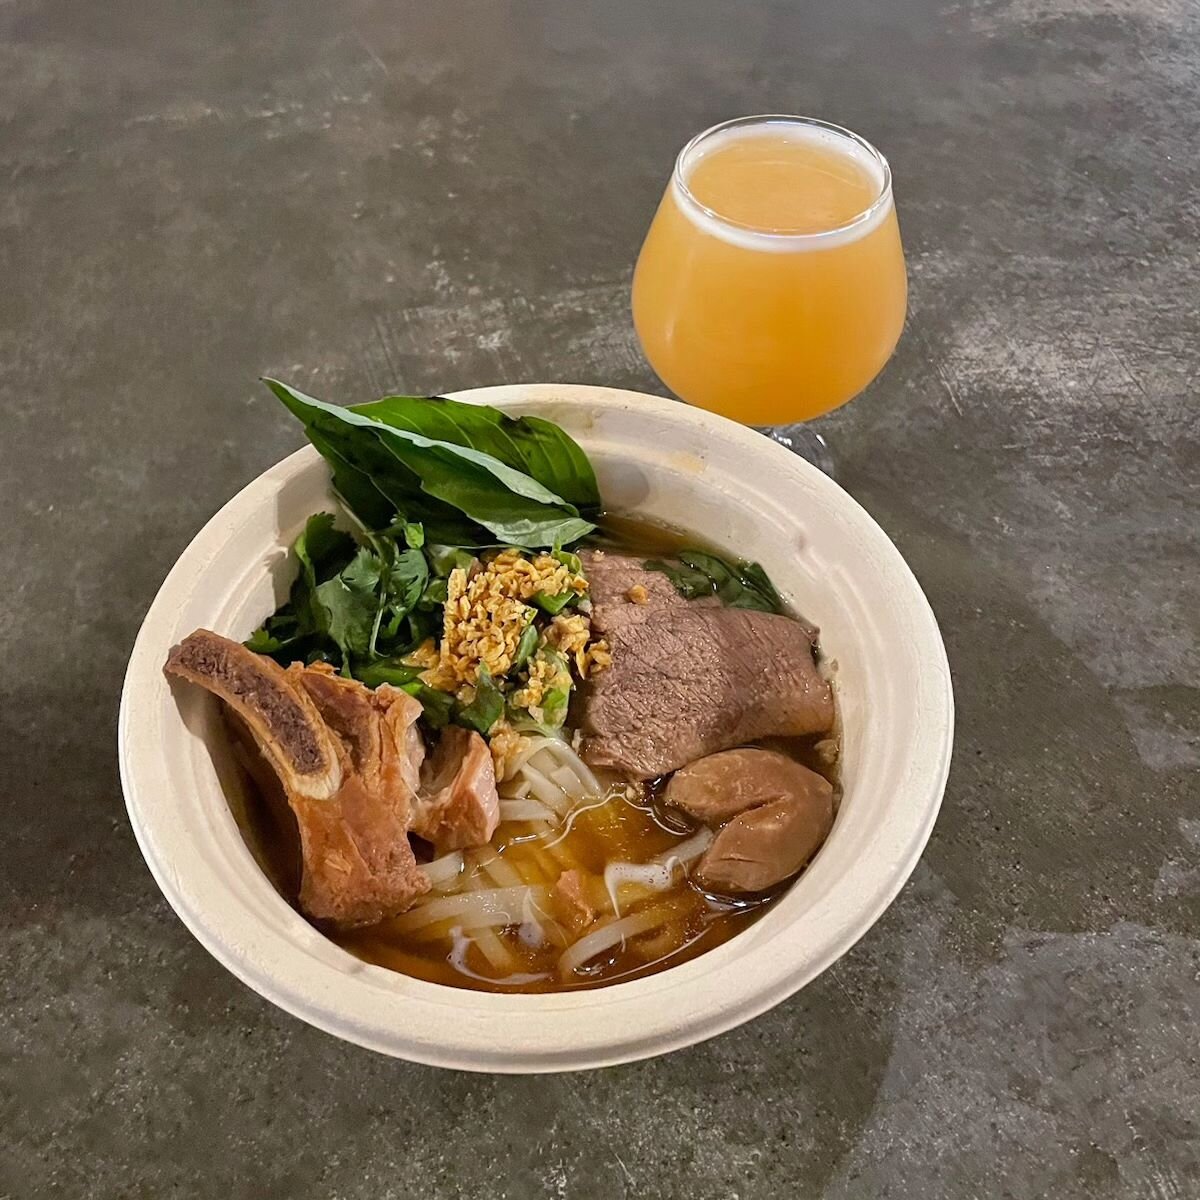 Warm up with a Divided By Zero and Stewed Beef Noodle Soup from @neenee0819 today! Feeling lazy? Order your beer online for quick pickup and get Thai to go! We are open today 12-9pm and @glennecho is playing originals inside 5-7pm!

Friendly Reminder